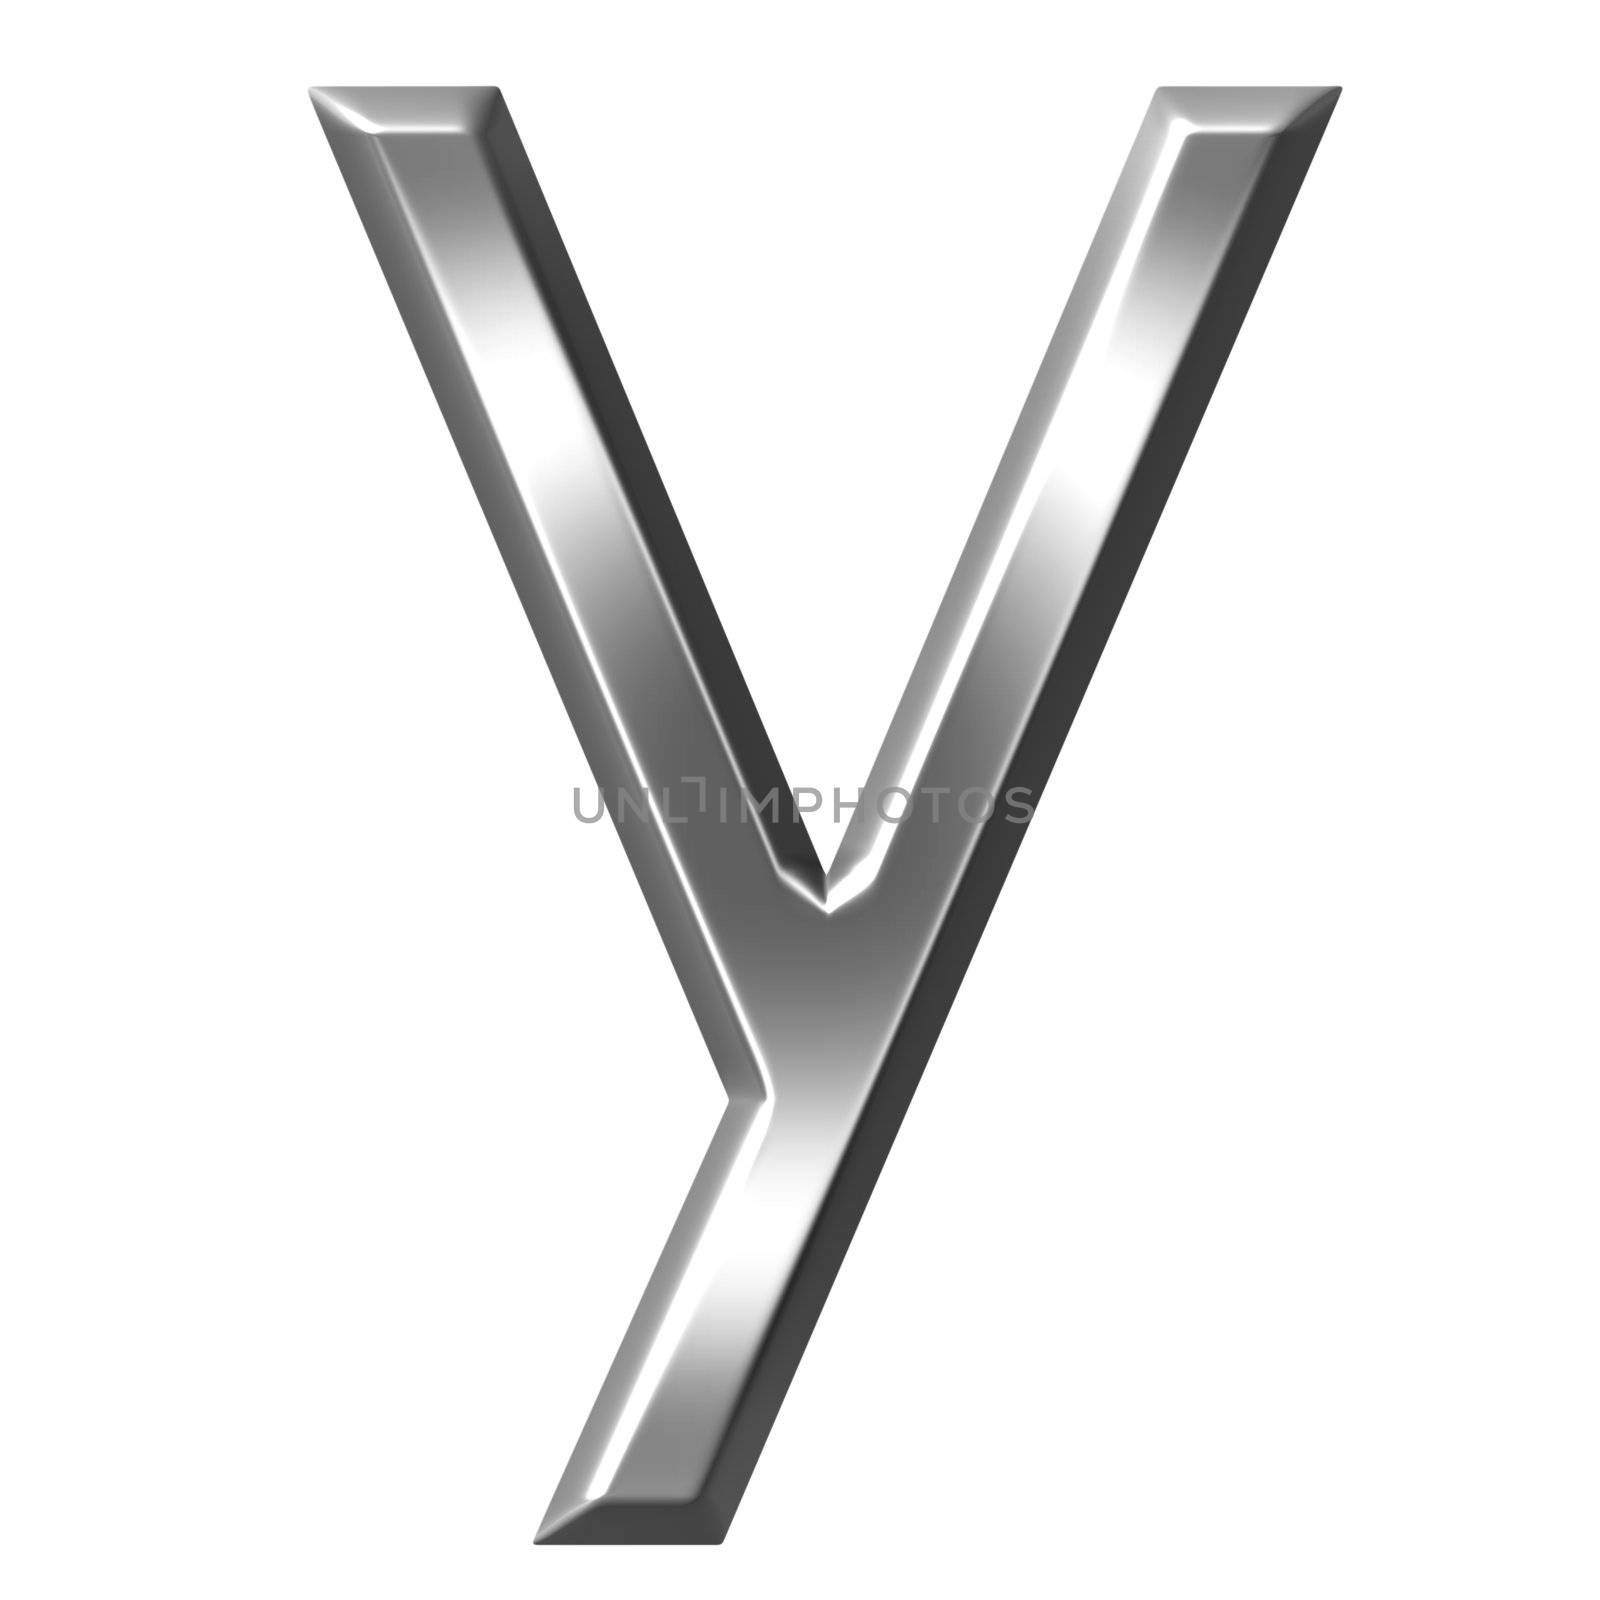 3d silver letter y isolated in white